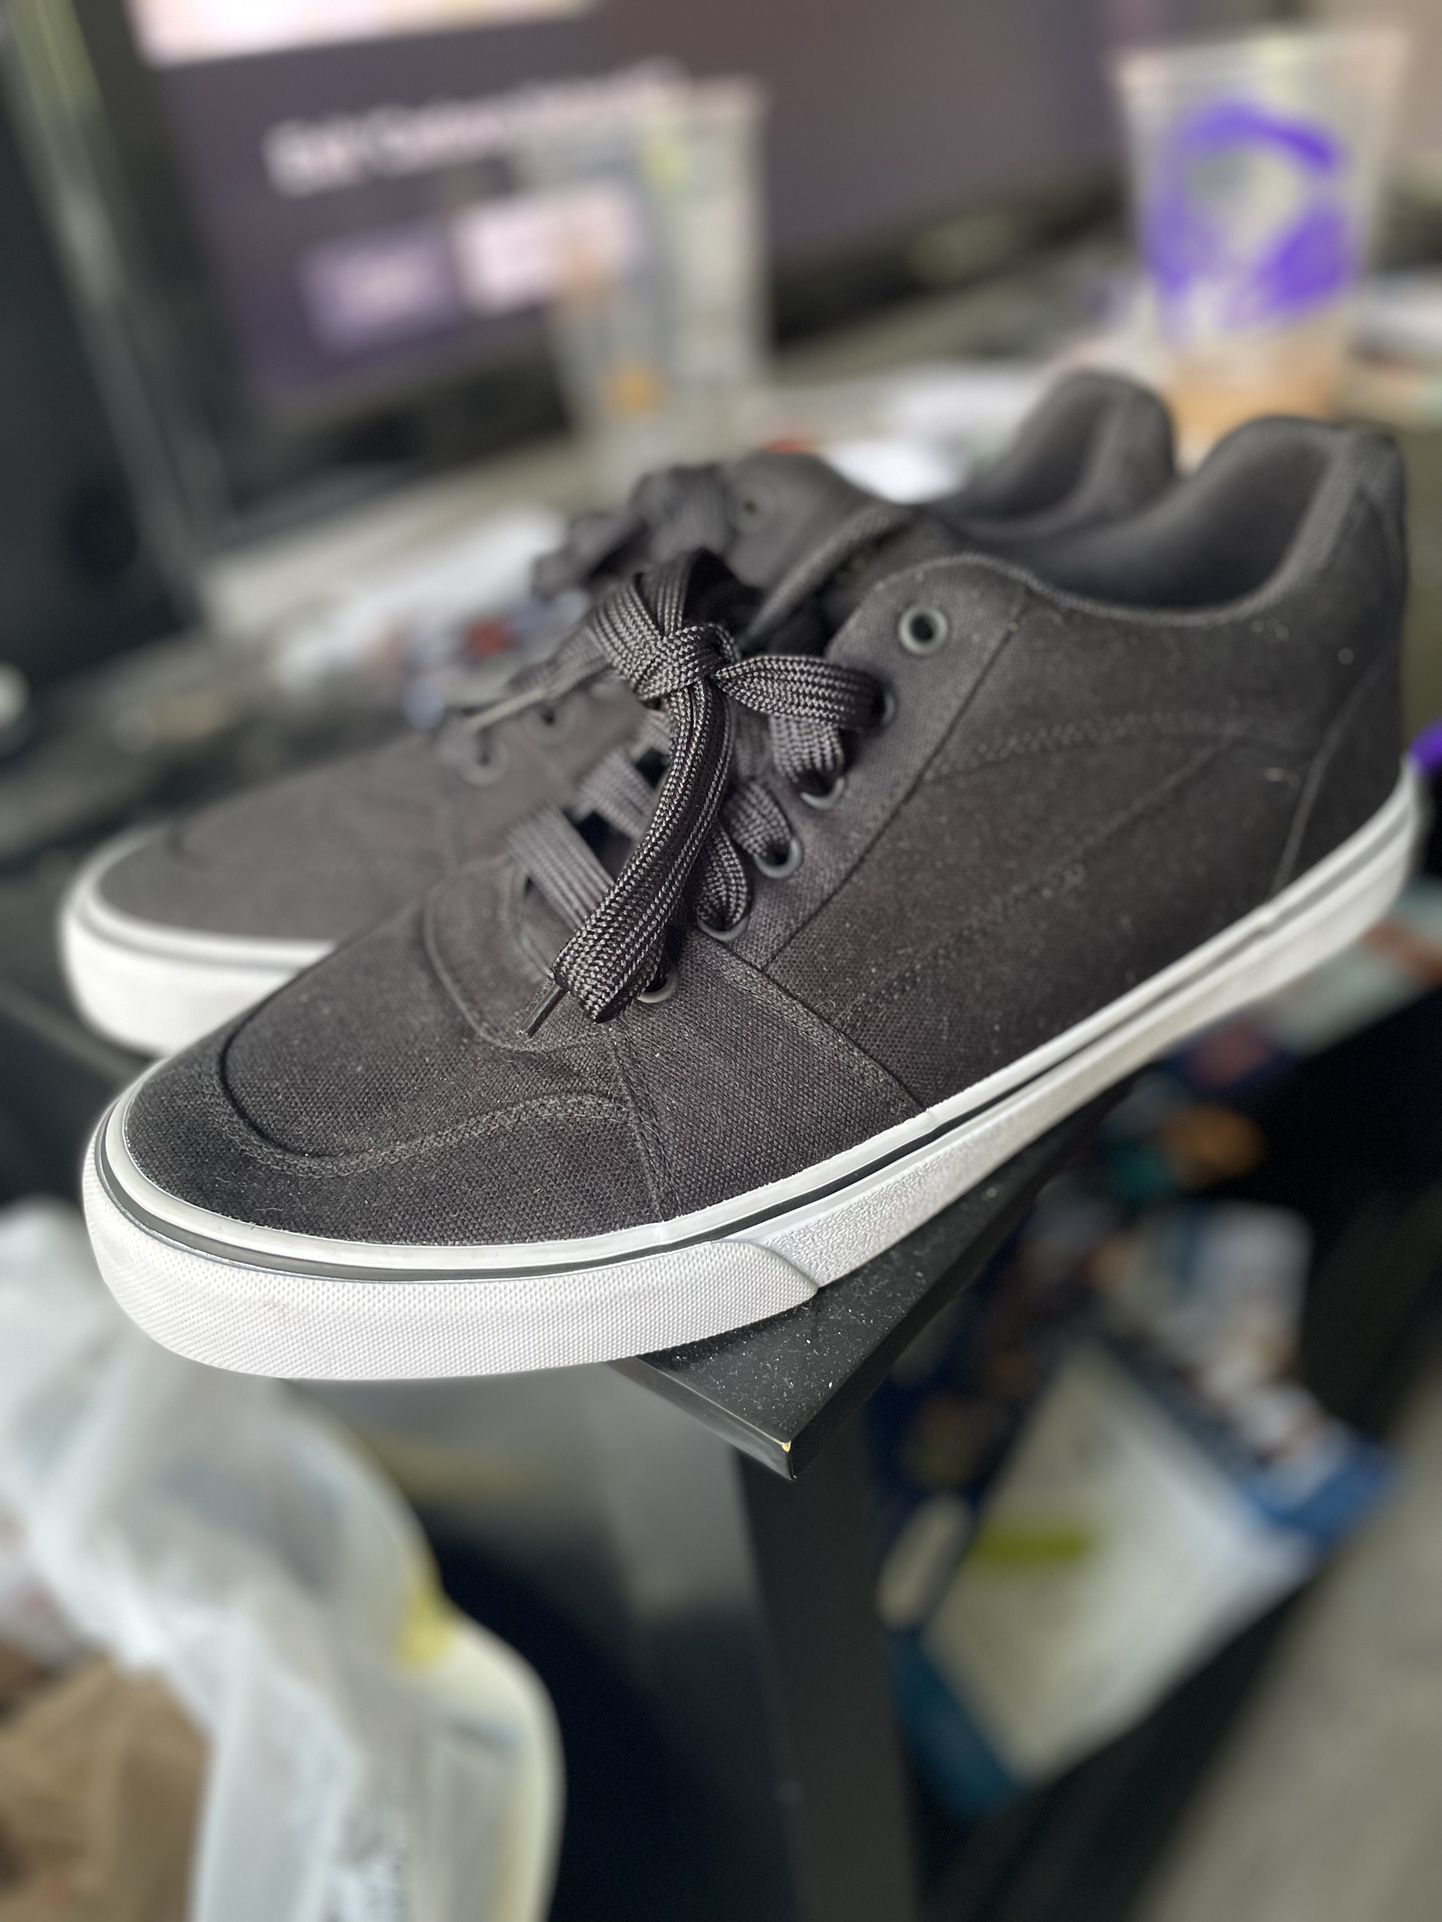 Low Top Vans Black And White 